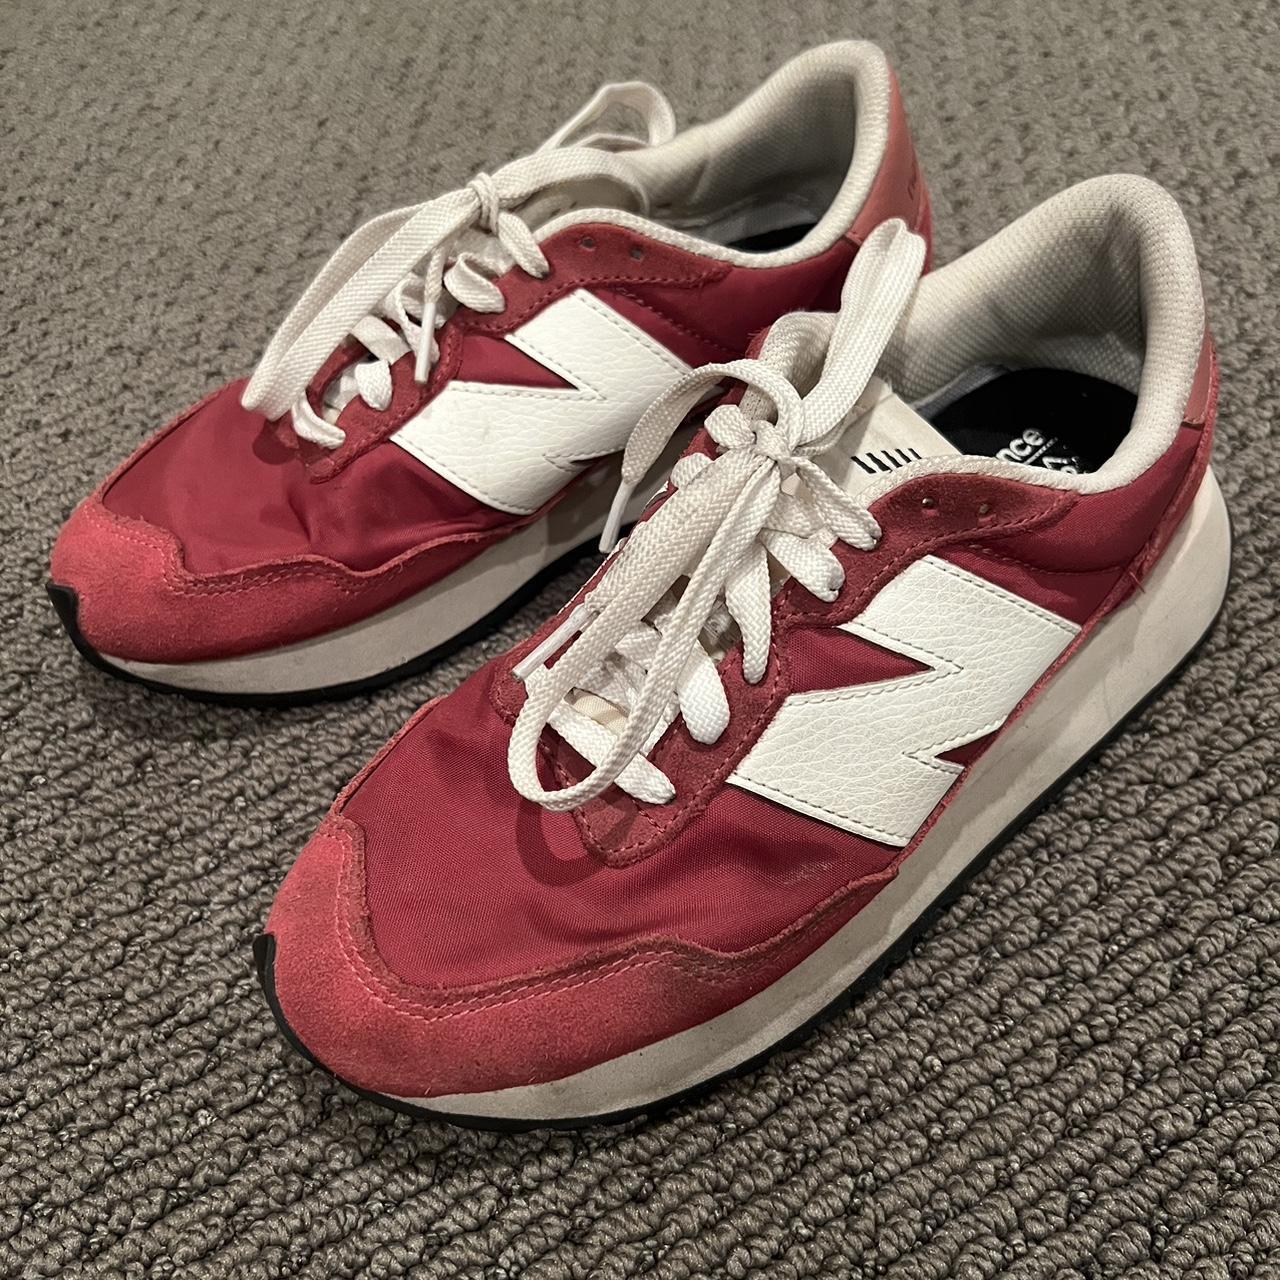 New Balance Women's Red and White Trainers (2)